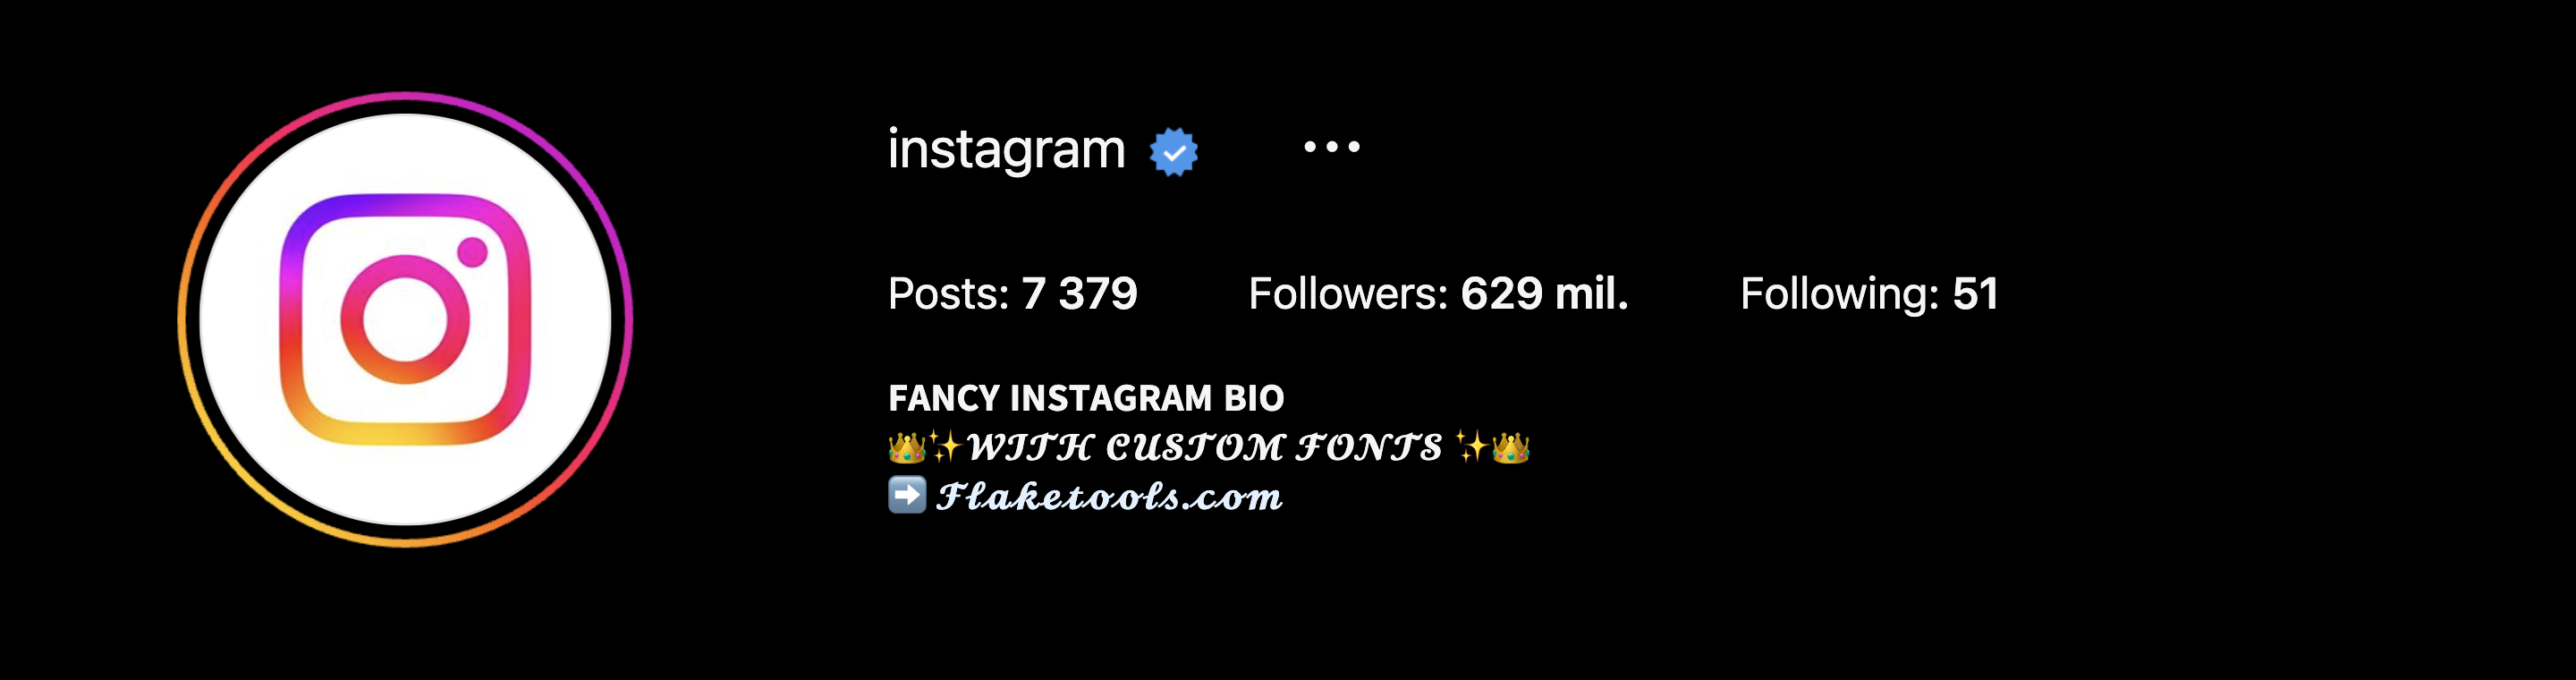 Instagram bio with included custom fonts and emojis